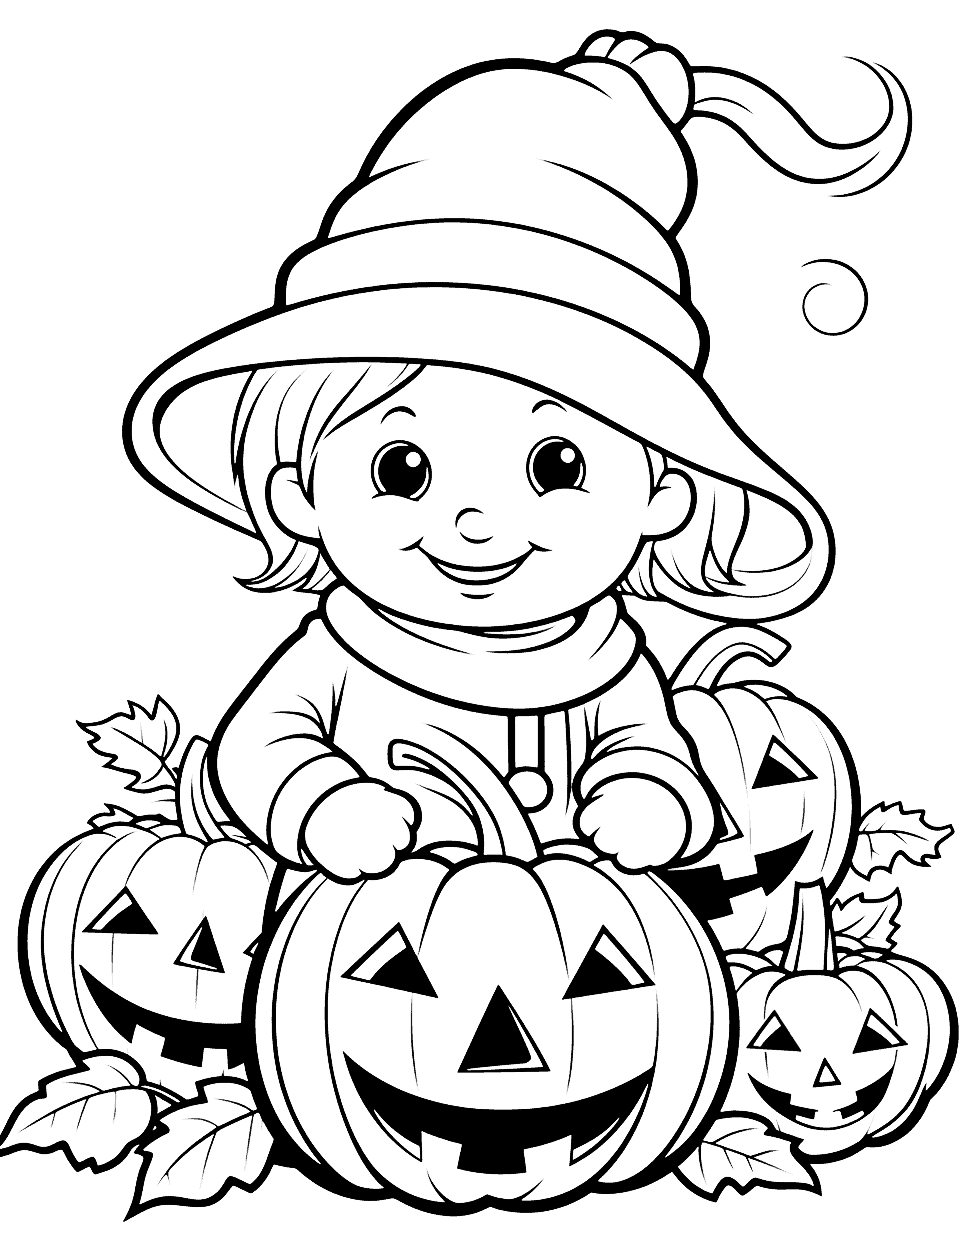 Baby's First Halloween Coloring Page - A coloring page featuring a baby wearing a witches hat, with pumpkins and Halloween decorations in the background.